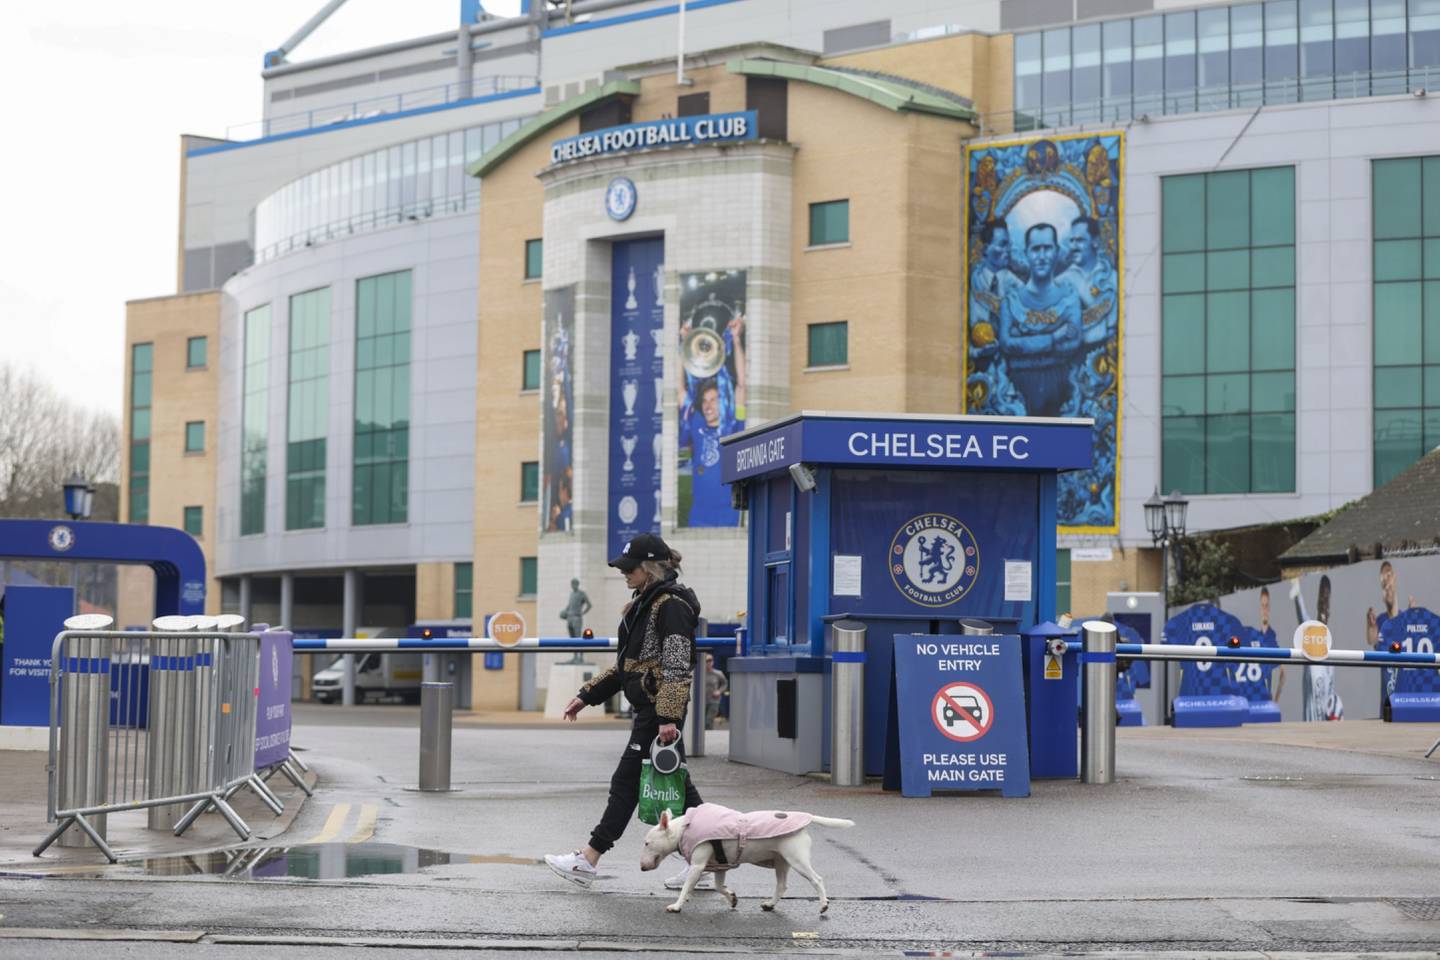 Stamford Bridge stadium, the home ground of Chelsea Football Club, owned by Russian billionaire Roman Abramovich, in London, U.K., on Wednesday, March, 2, 2022. Abramovich is selling his London properties, according to British MP Chris Bryant, and a Swiss billionaire said hes been approached about buying Chelsea Football Club. Photographer: Hollie Adams/Bloombergdfd